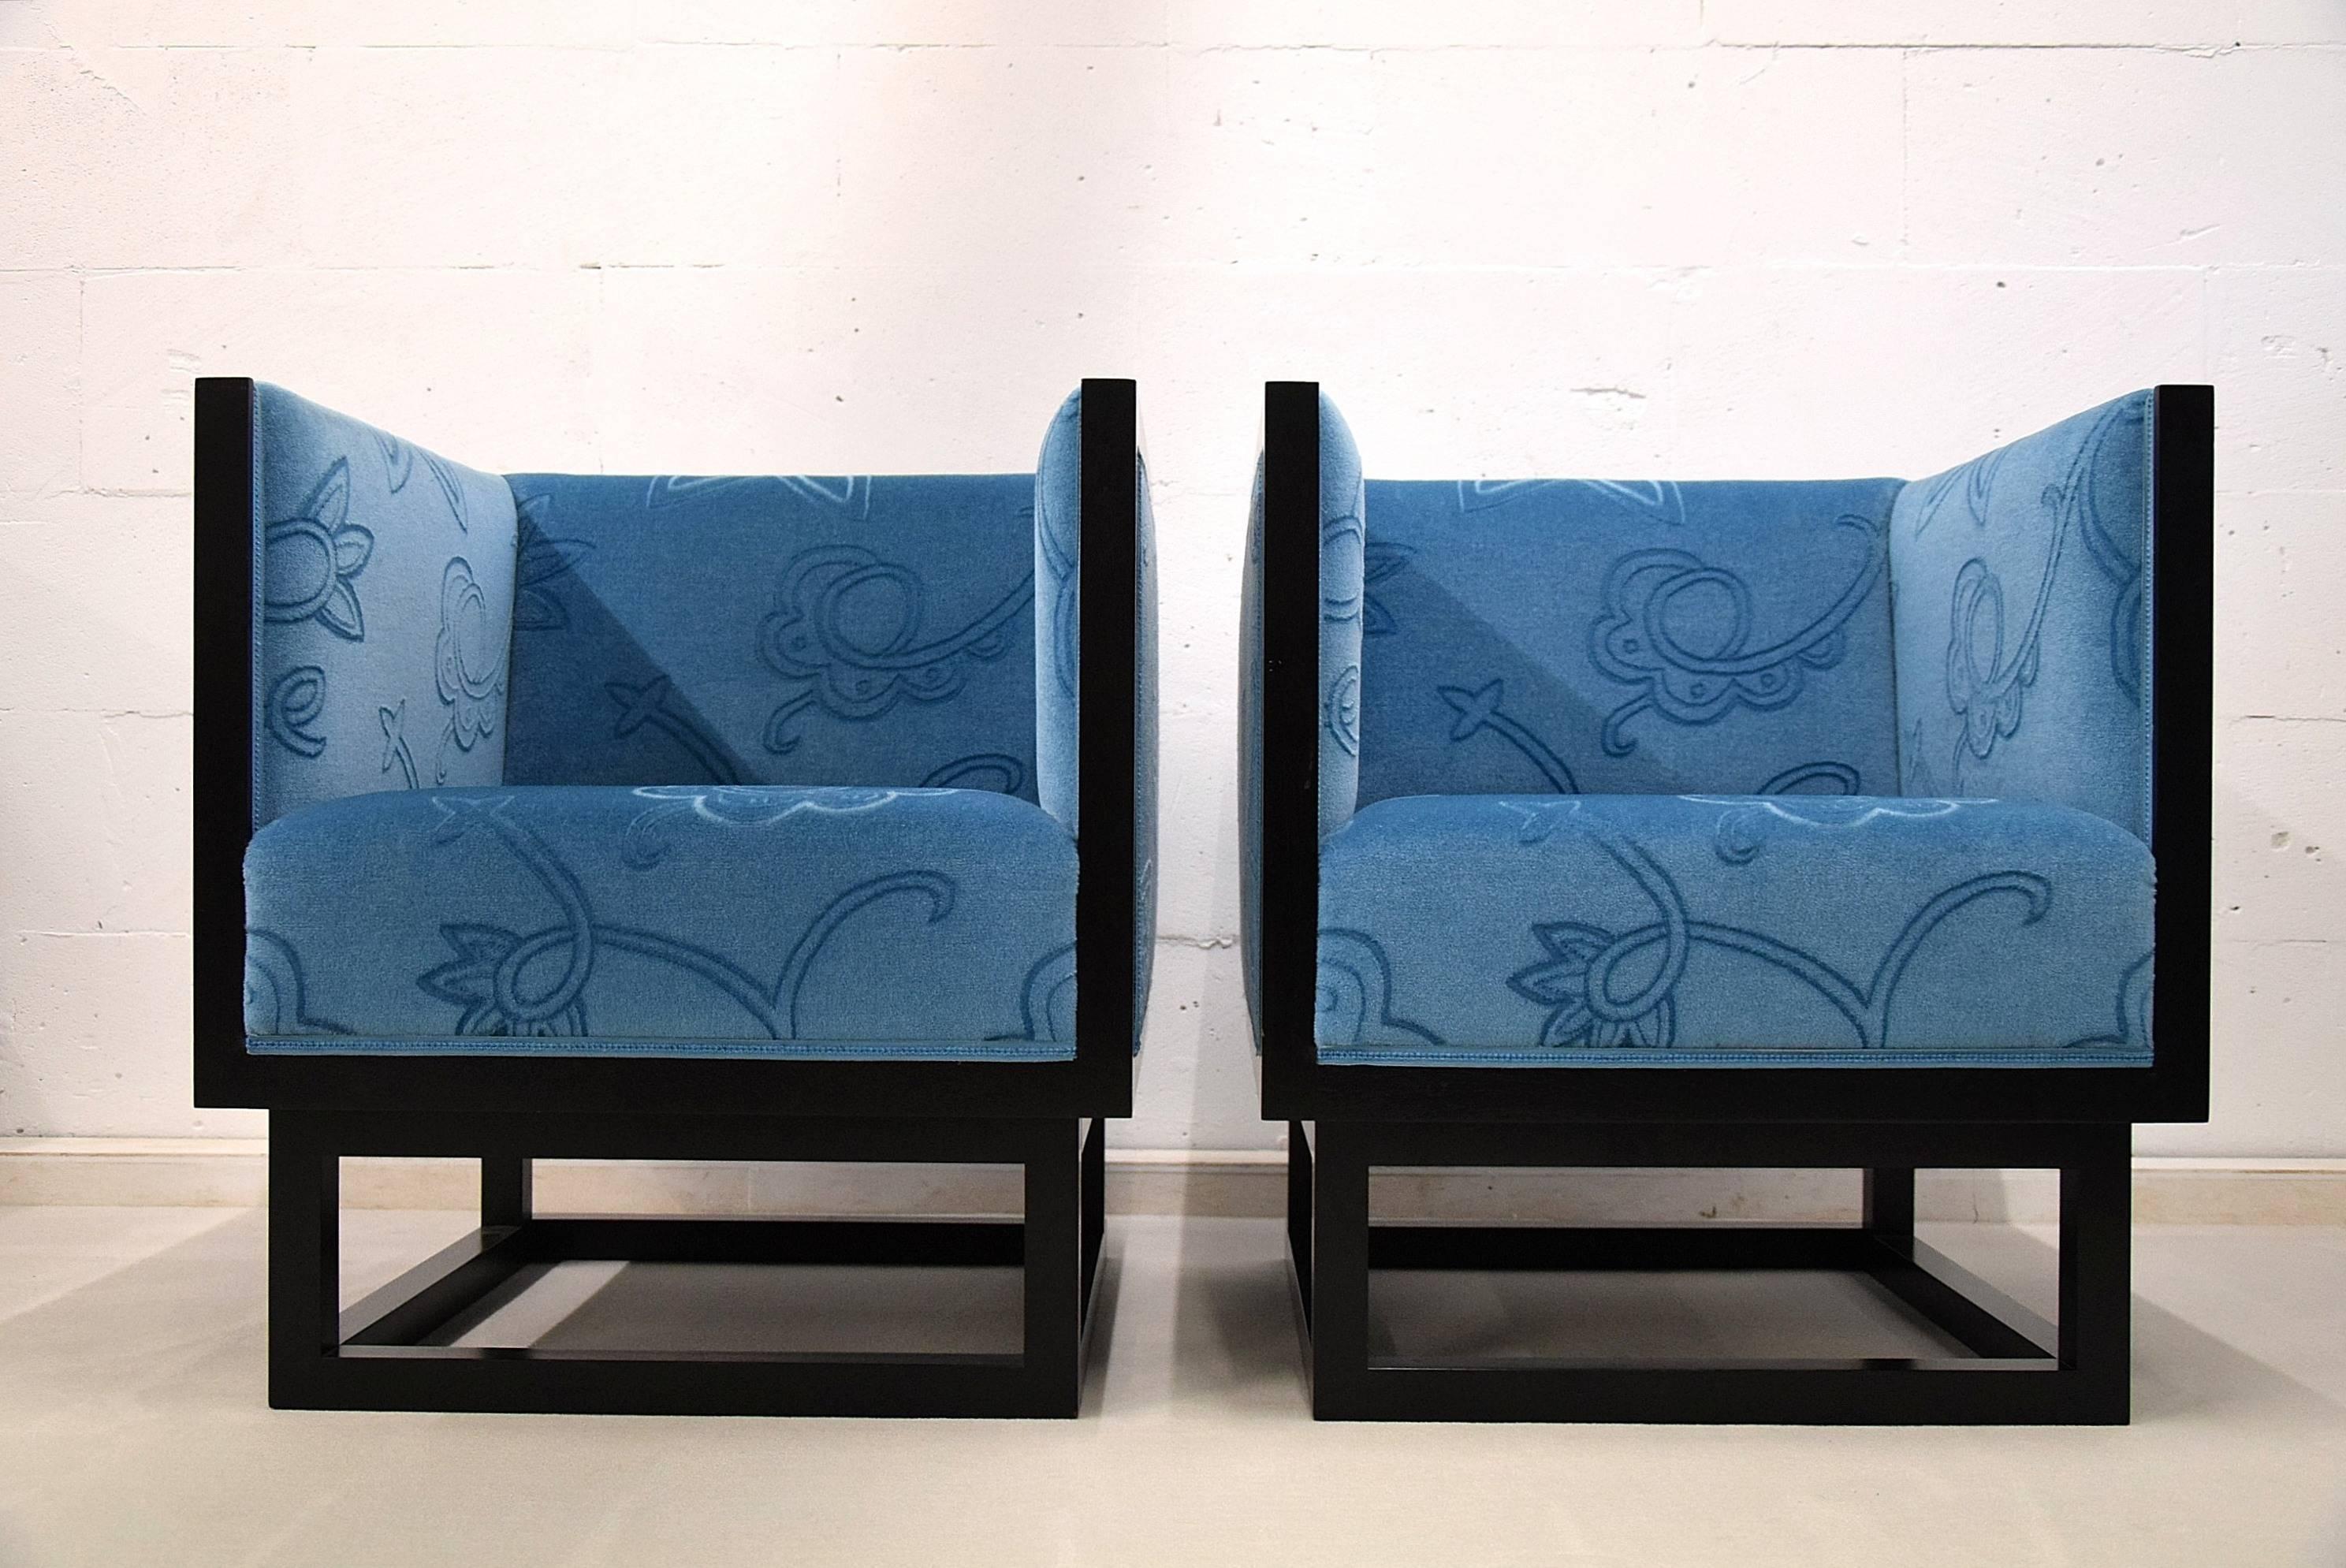 Cabinett Josef Hoffmann Lounge Chairs
A gorgeous pair of Cabinett chairs by Josef Hoffmann originally designed in 1903 for the house of Doctor Salzer in Vienna. Even though they were designed in 1903, they are exactly what know we know as the